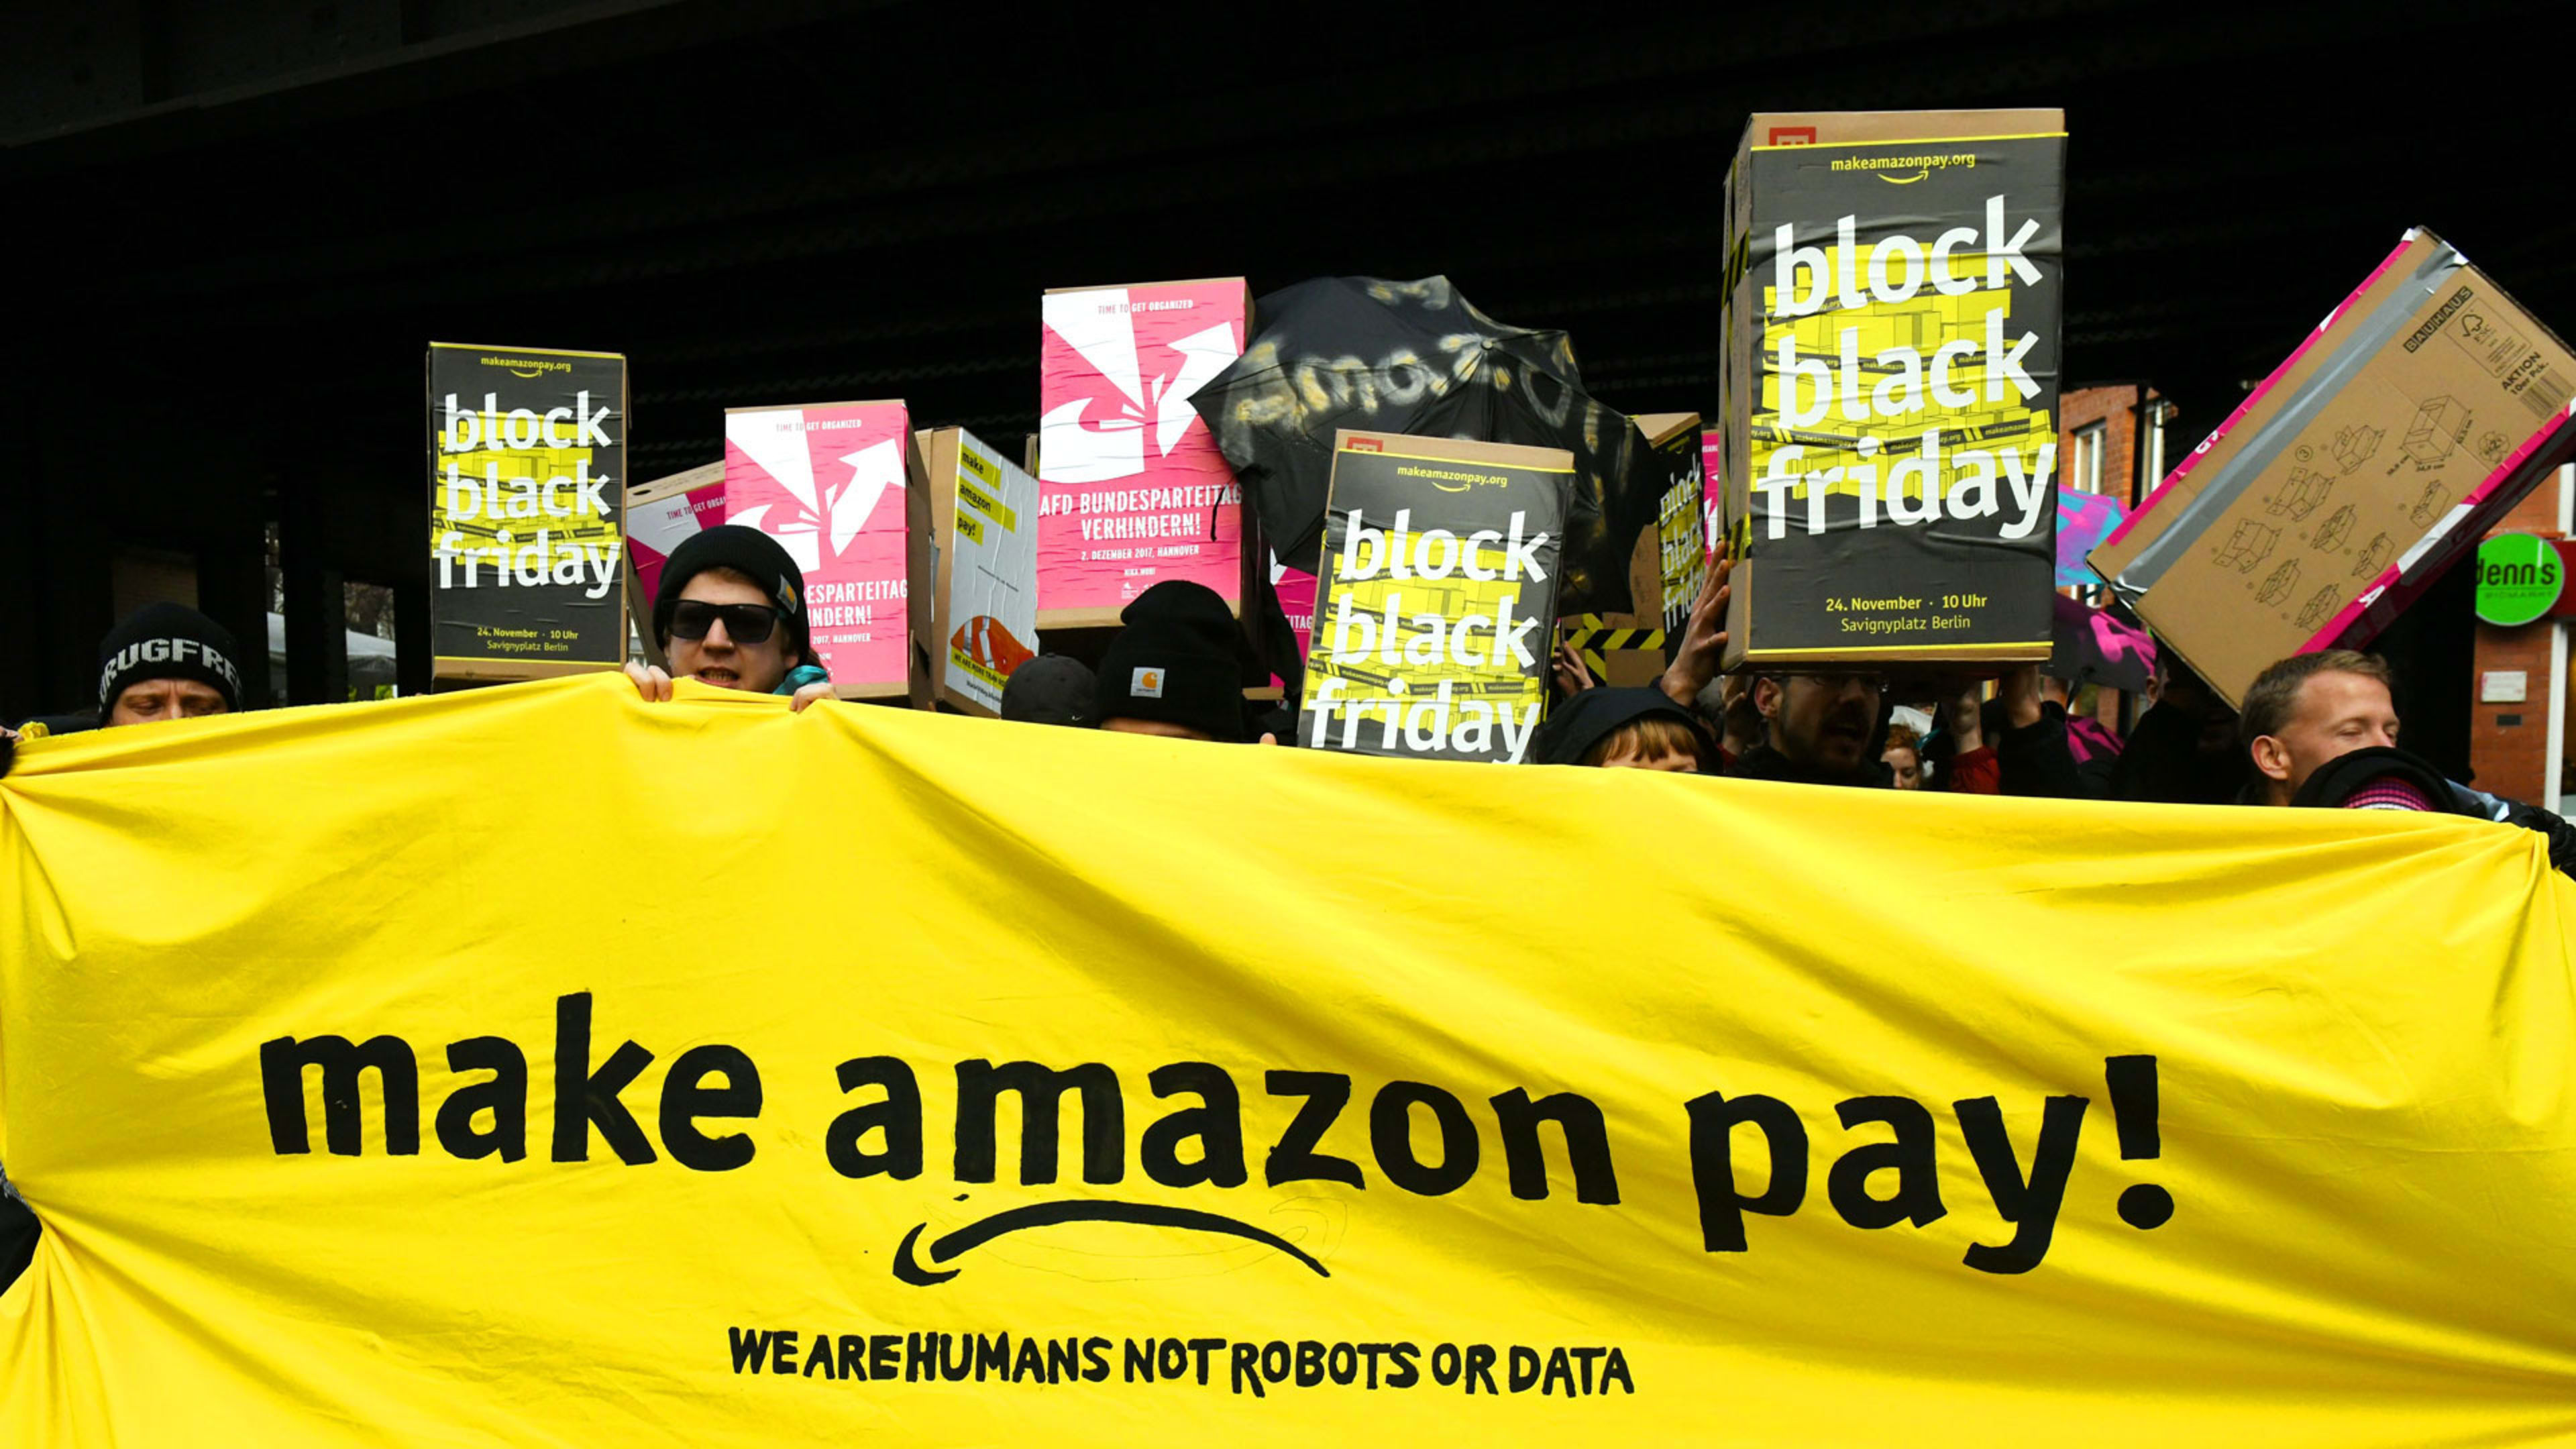 Amazon is dealing with a wave of Black Friday strikes in Europe